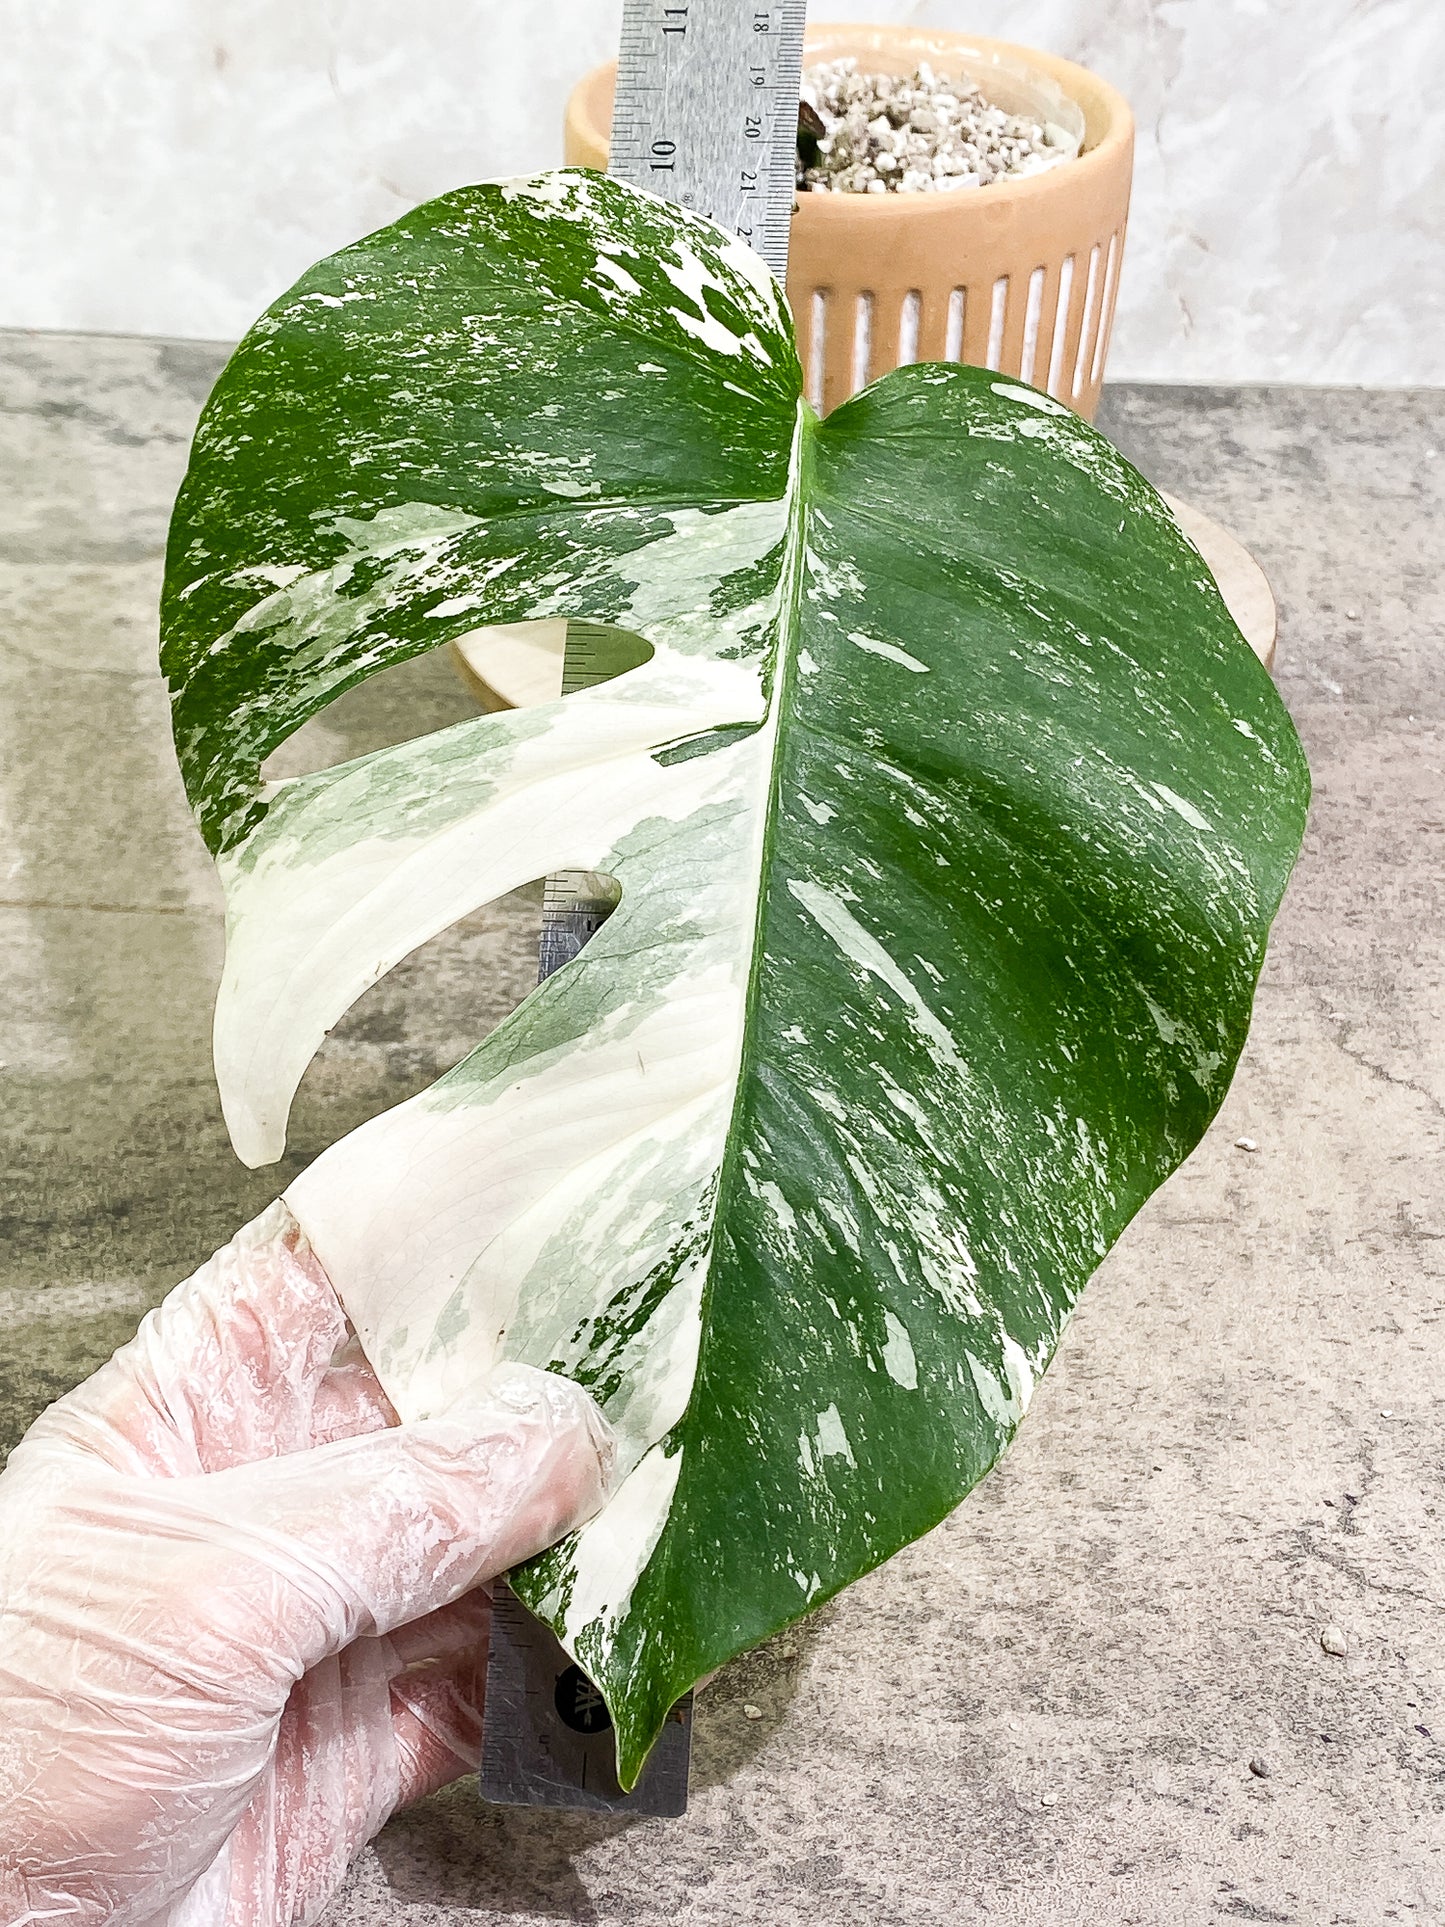 Monstera Albo Variegated 1 leaf 1 growth point slightly rooted